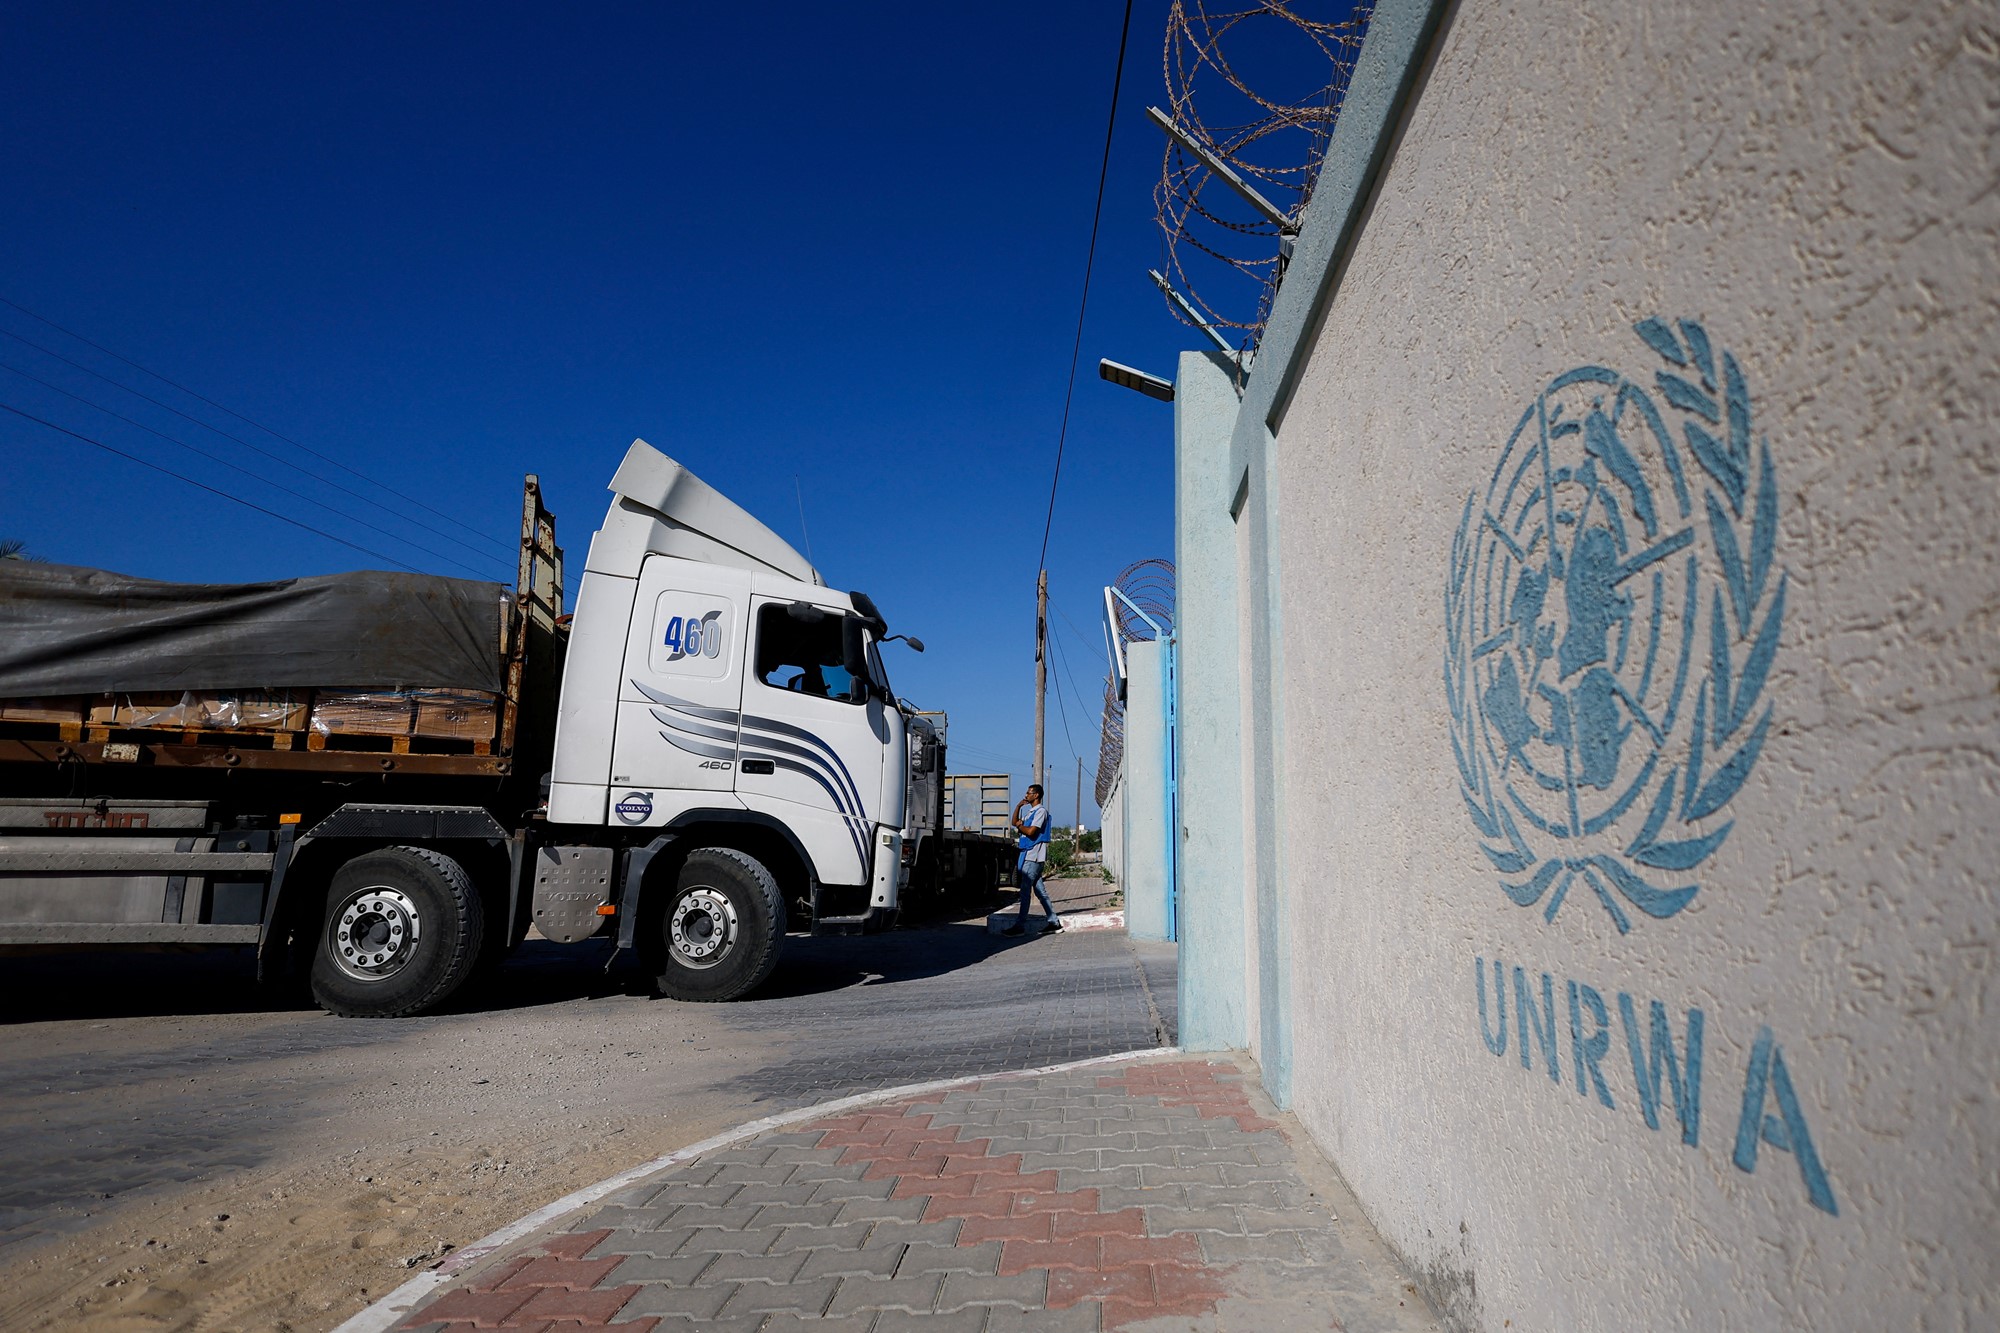 A truck is pictured in front of a wall that says UNRWA